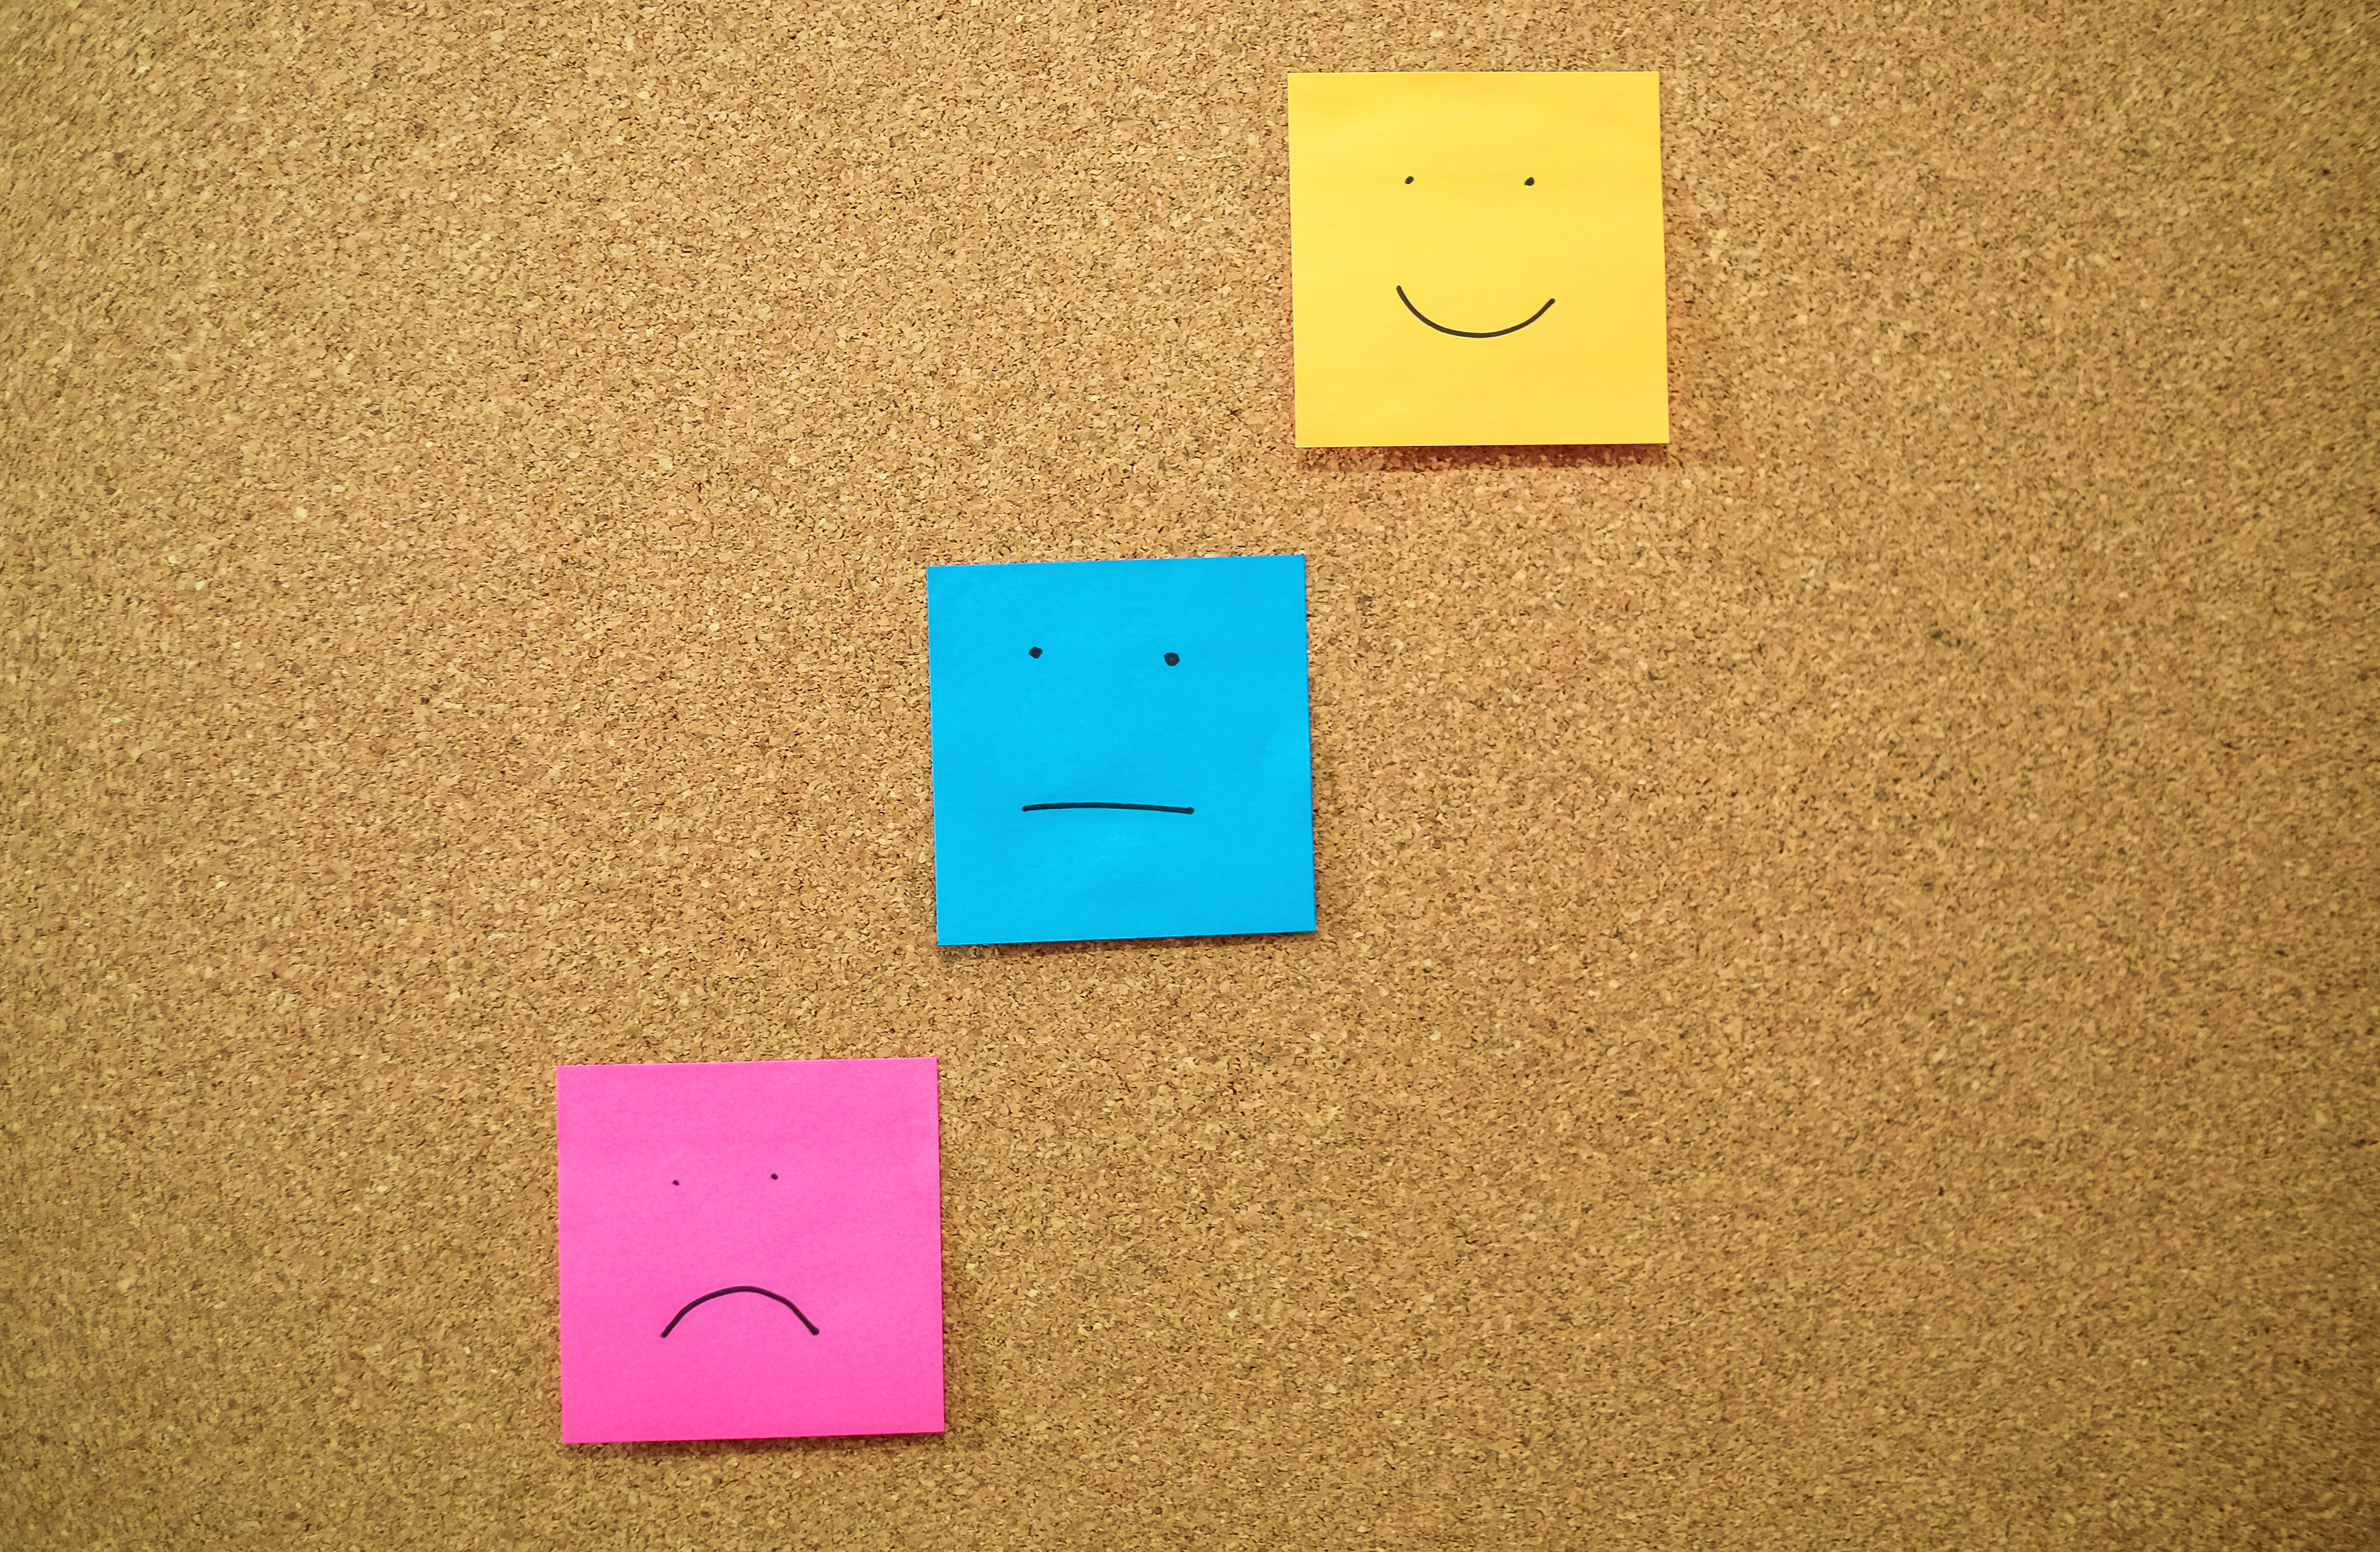 Colorful Papers With Anthropomorphic Faces Stuck On Wall